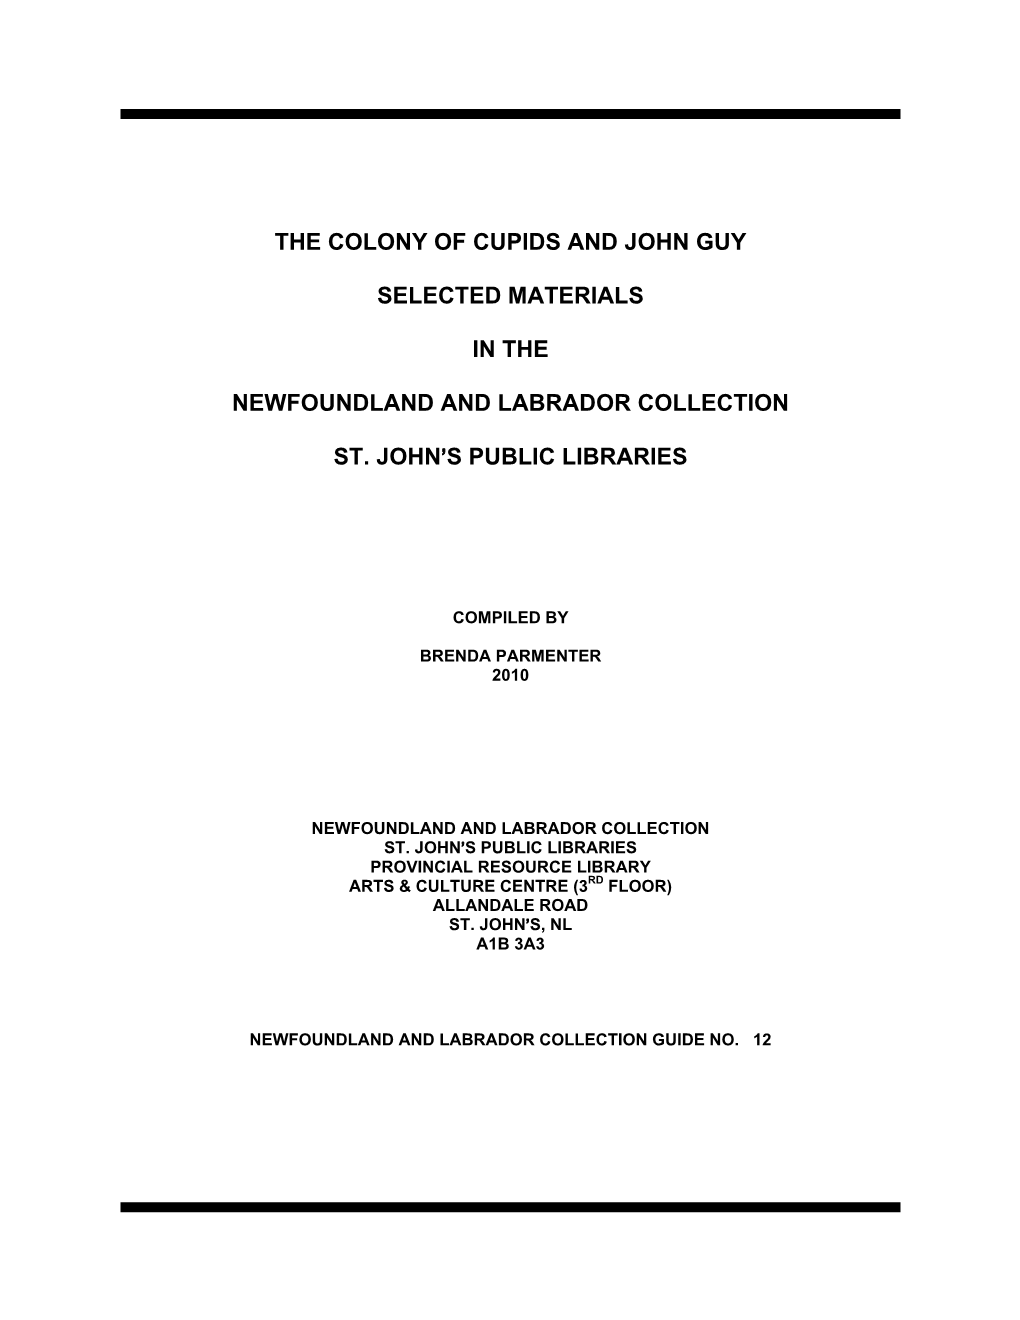 The Colony of Cupids and John Guy Selected